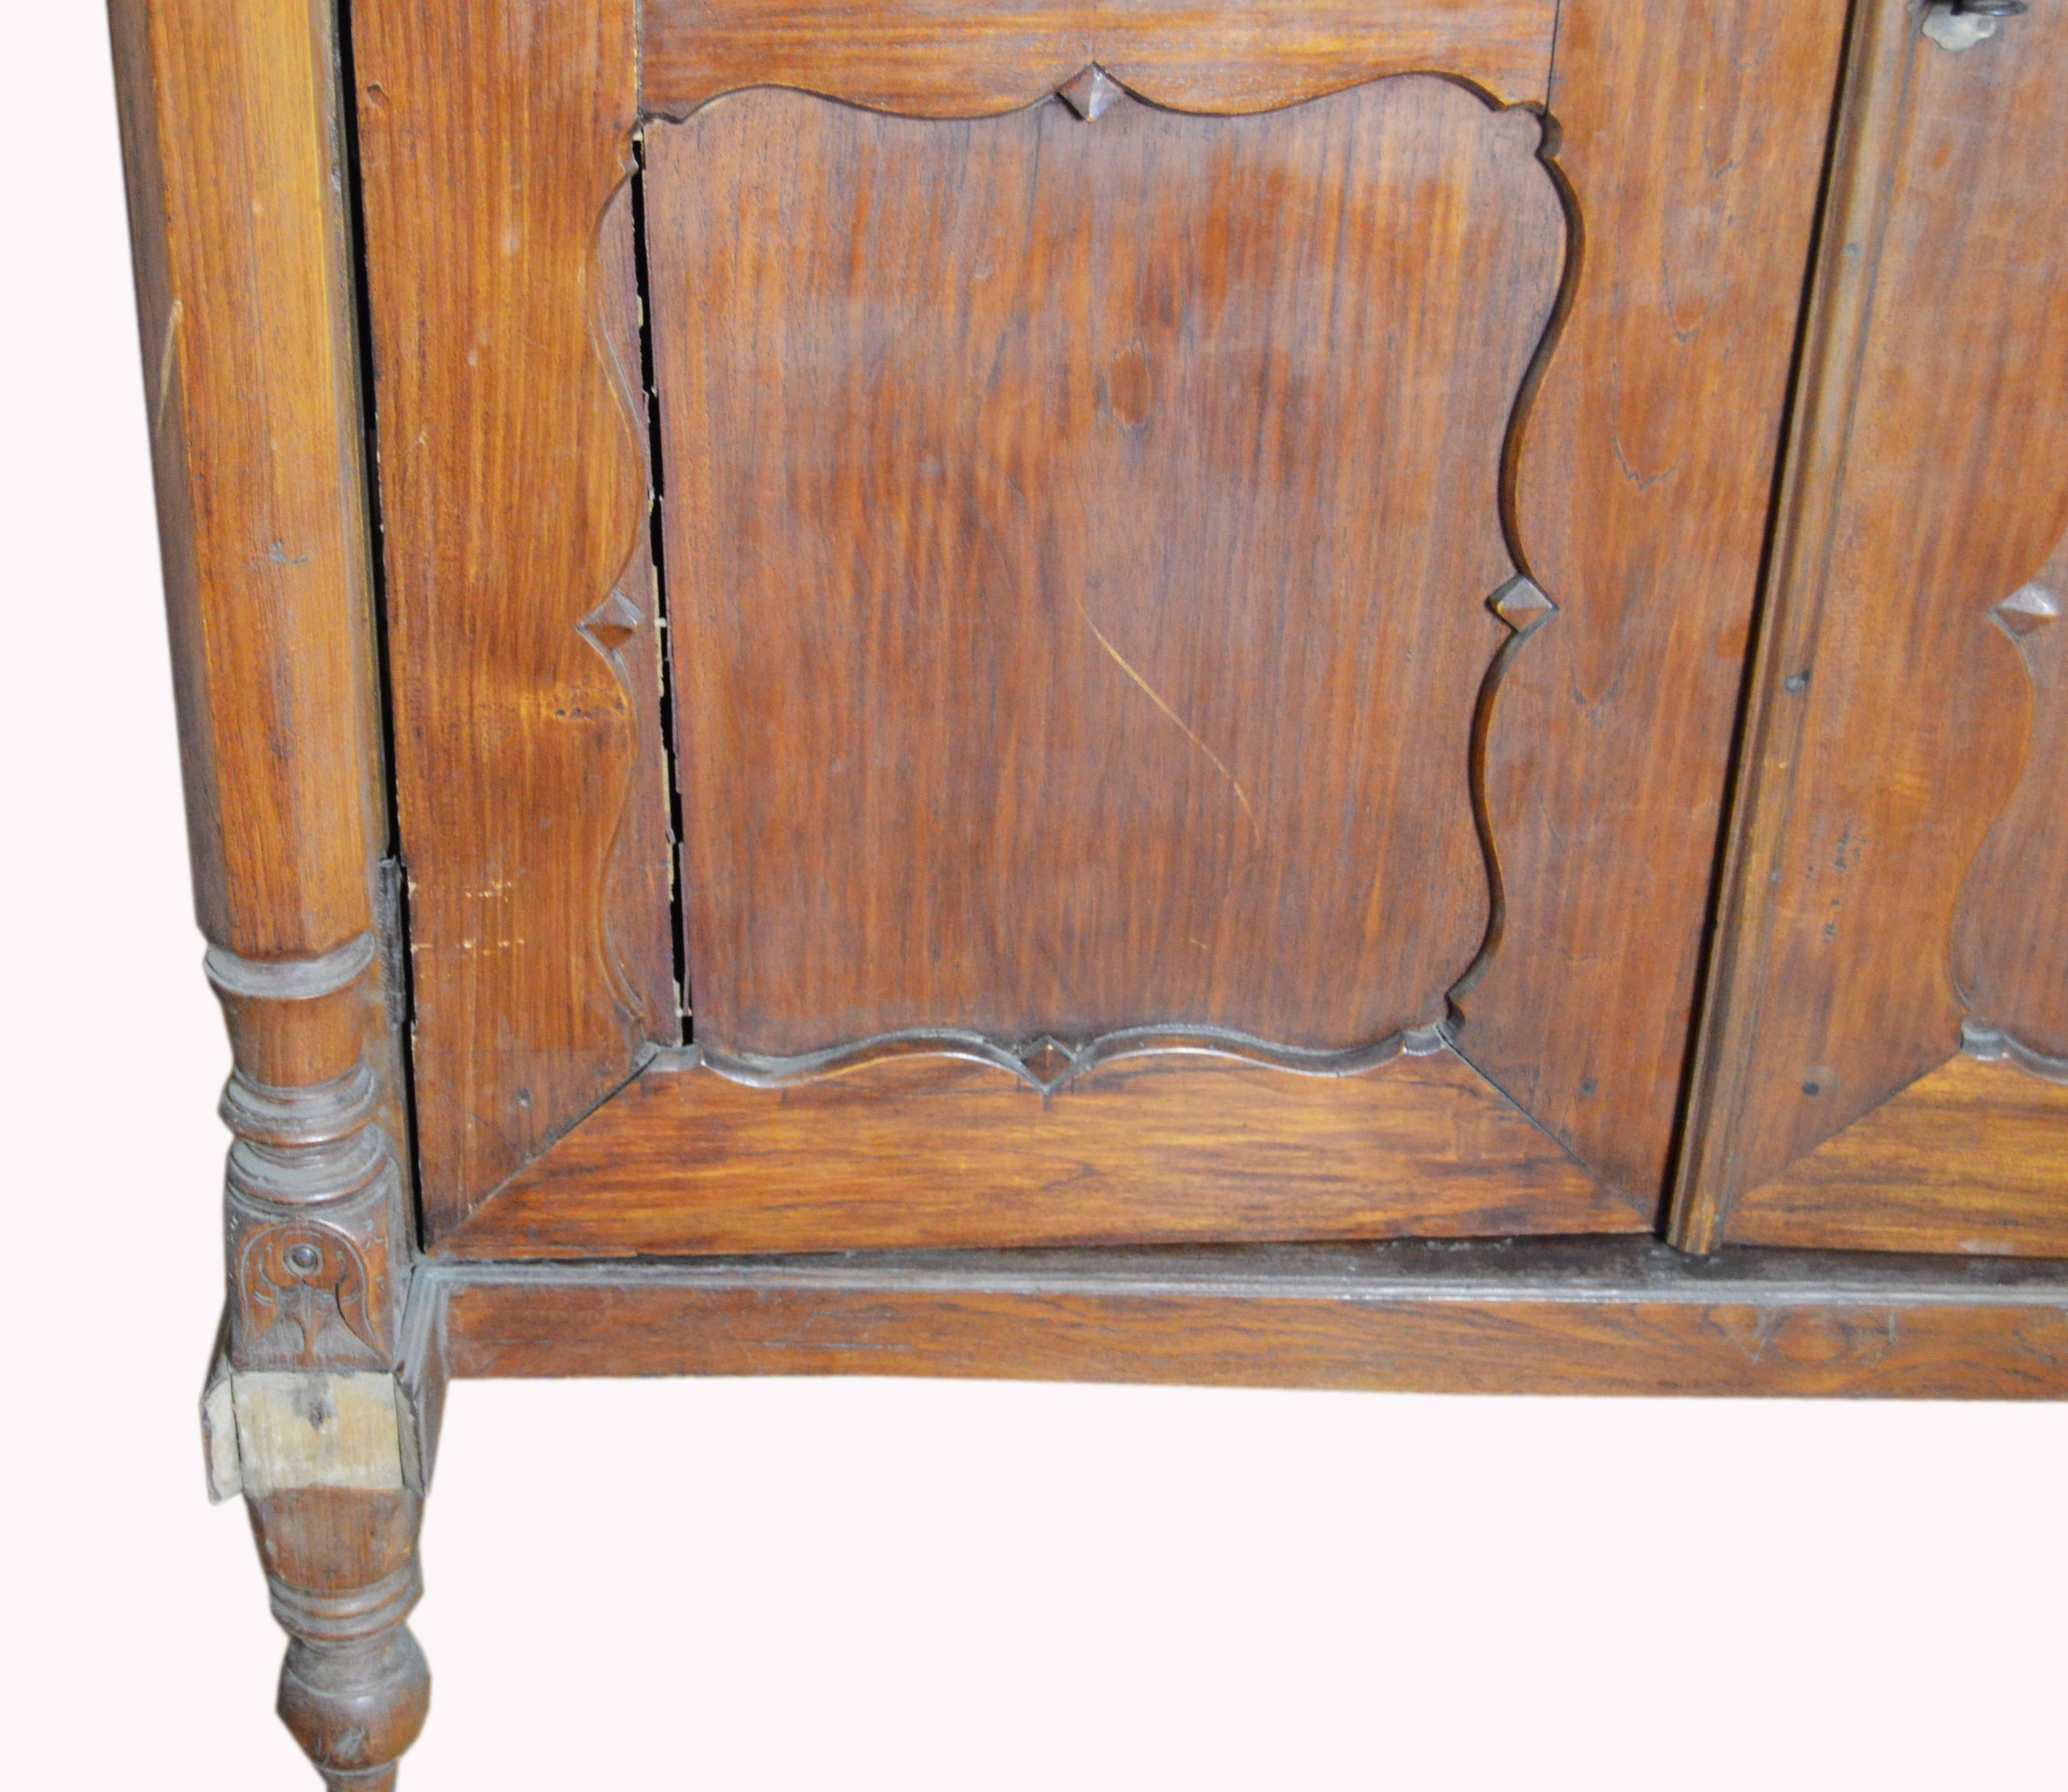 Carved 19th Century Dutch Colonial Lacquered Armoire with Columns and Paneled Doors